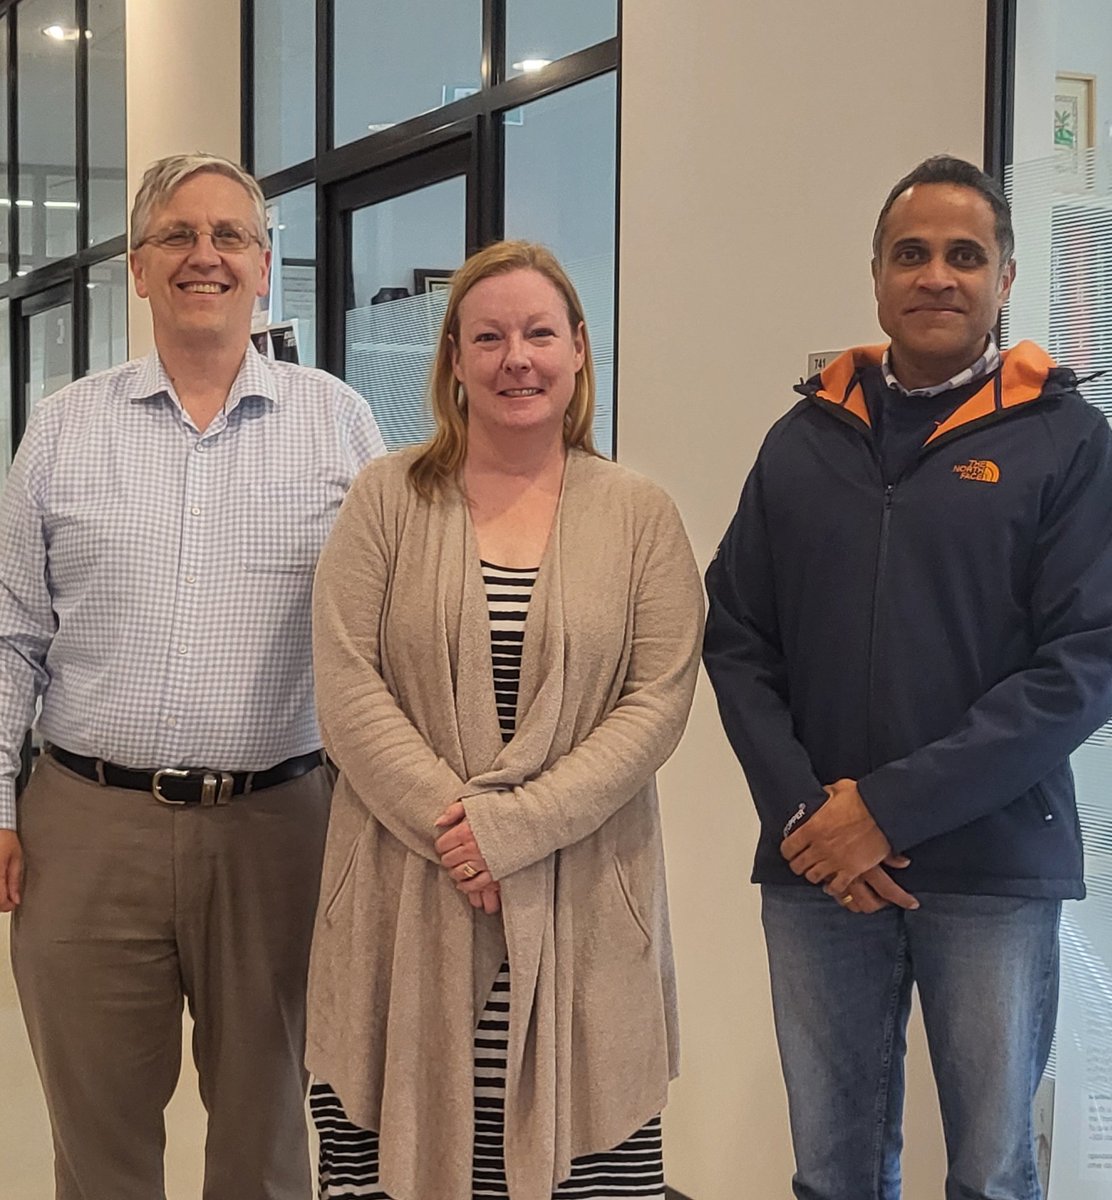 And now with a photo of Jennifer @JenLoveChem Shenal @RACInational and I. Looking forward to more collaboration between the RACI and CSC #ozchem @CIC_ChemInst